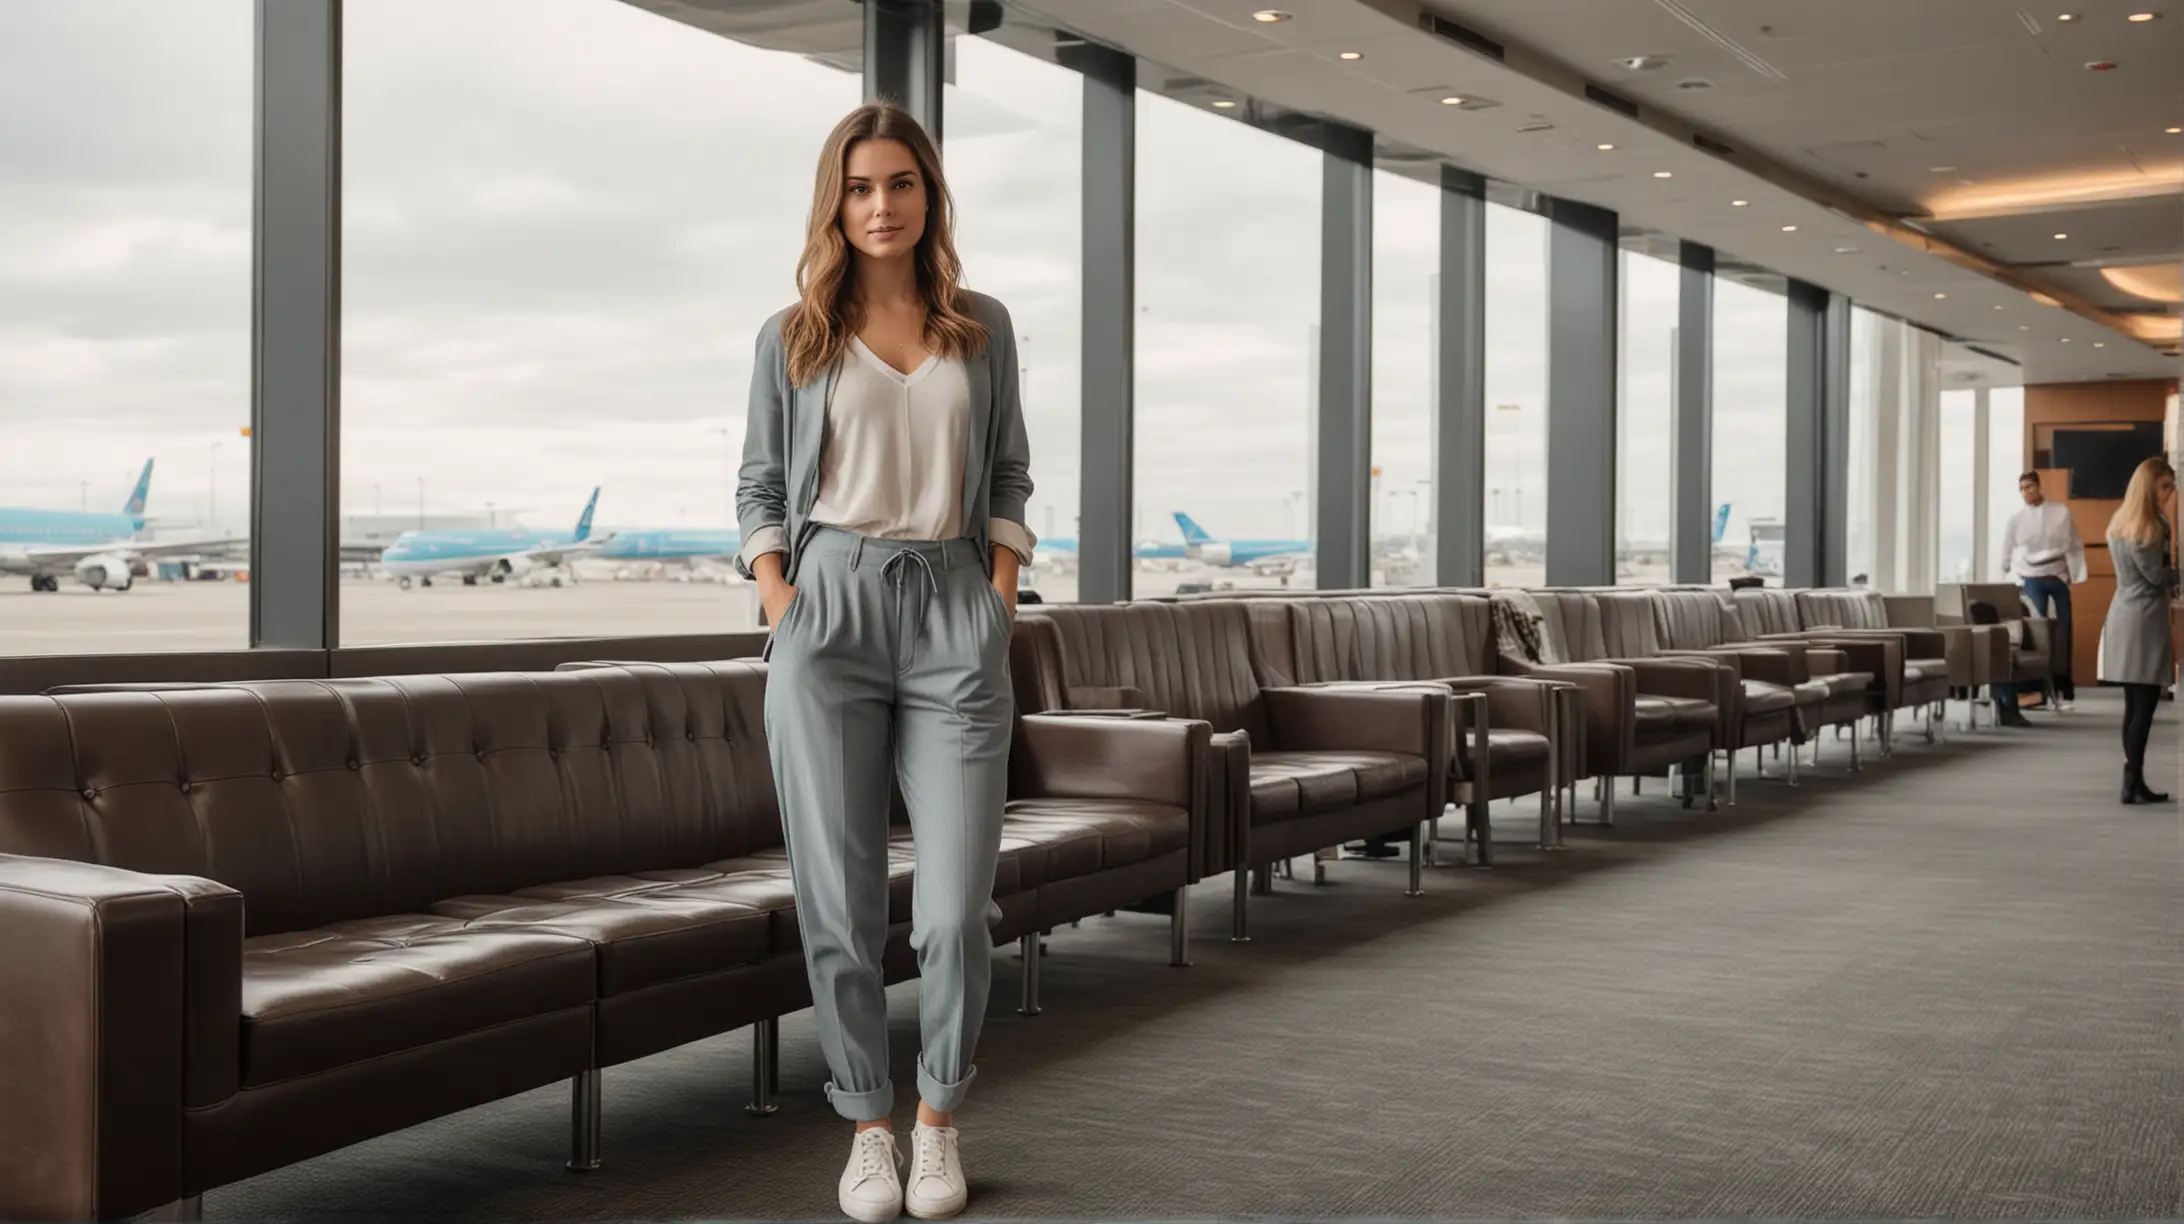 Young North American Womans FullBody Portrait at Airport Lounge